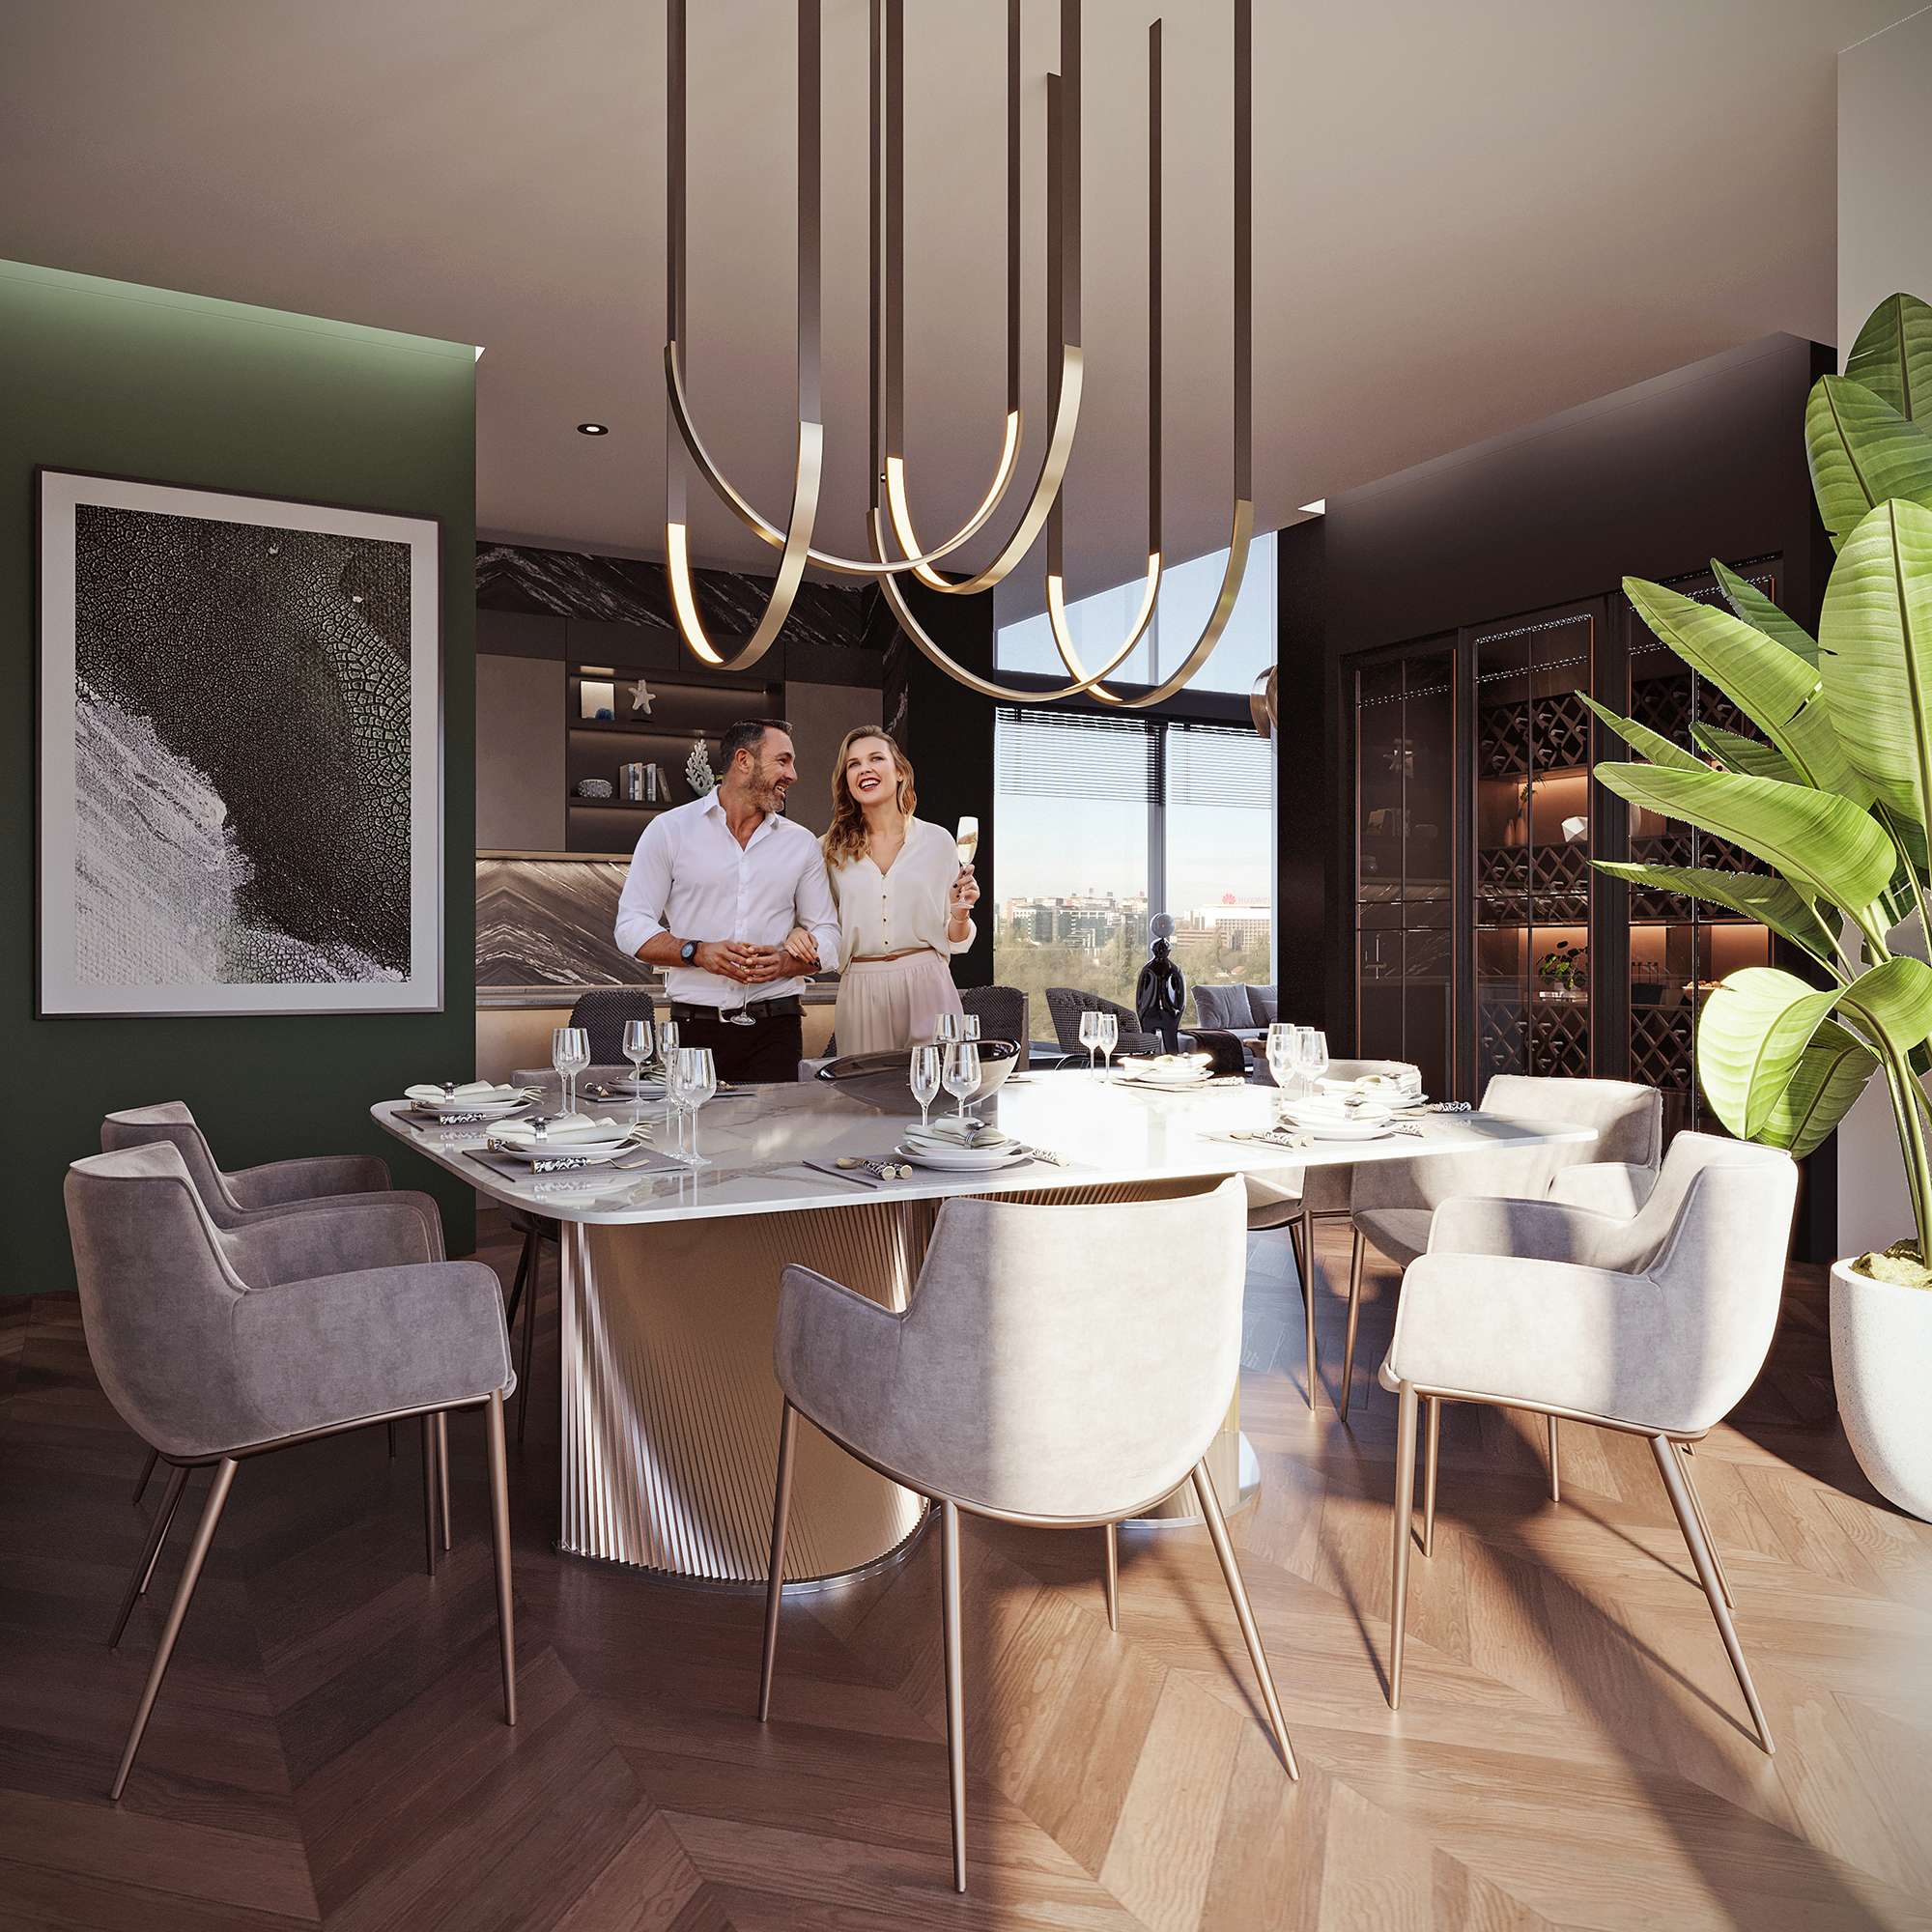 Penthouse dining room in BW Perla building